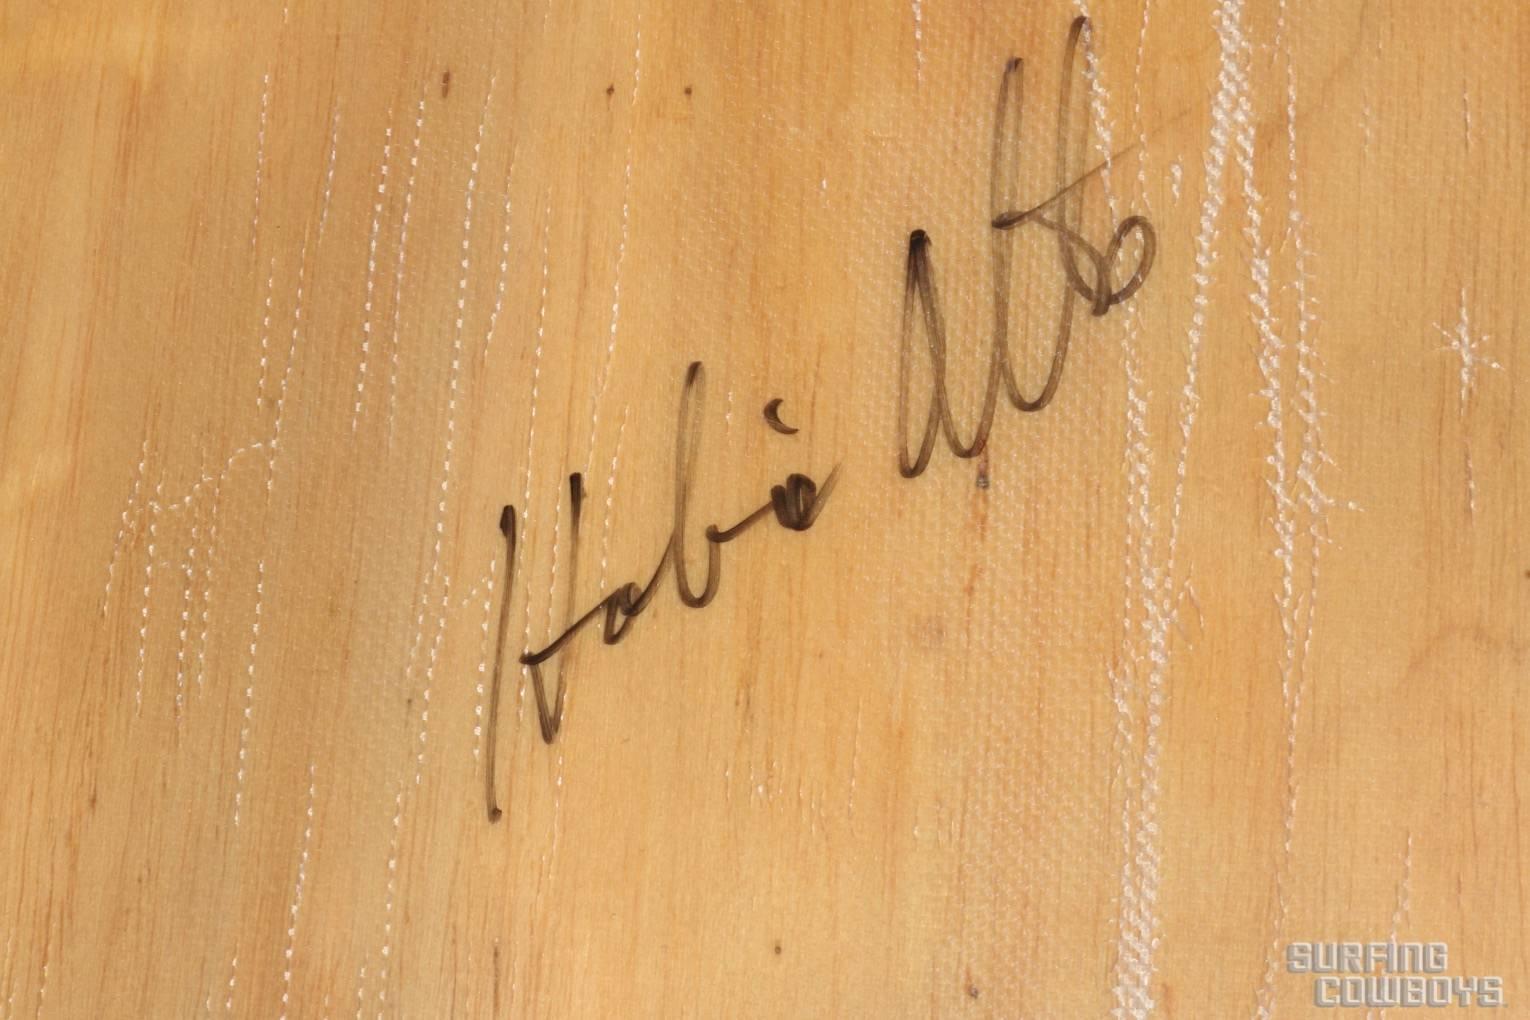 Balsa Wood Surfboard, Circa 1950, All Original, Signed Hobie Alter
This is a board with presence.  Made of solid balsa wood with fiberglass and resin wrap that makes it hard and gives it shape. 

Hobie signed this board about 8 years ago, at an